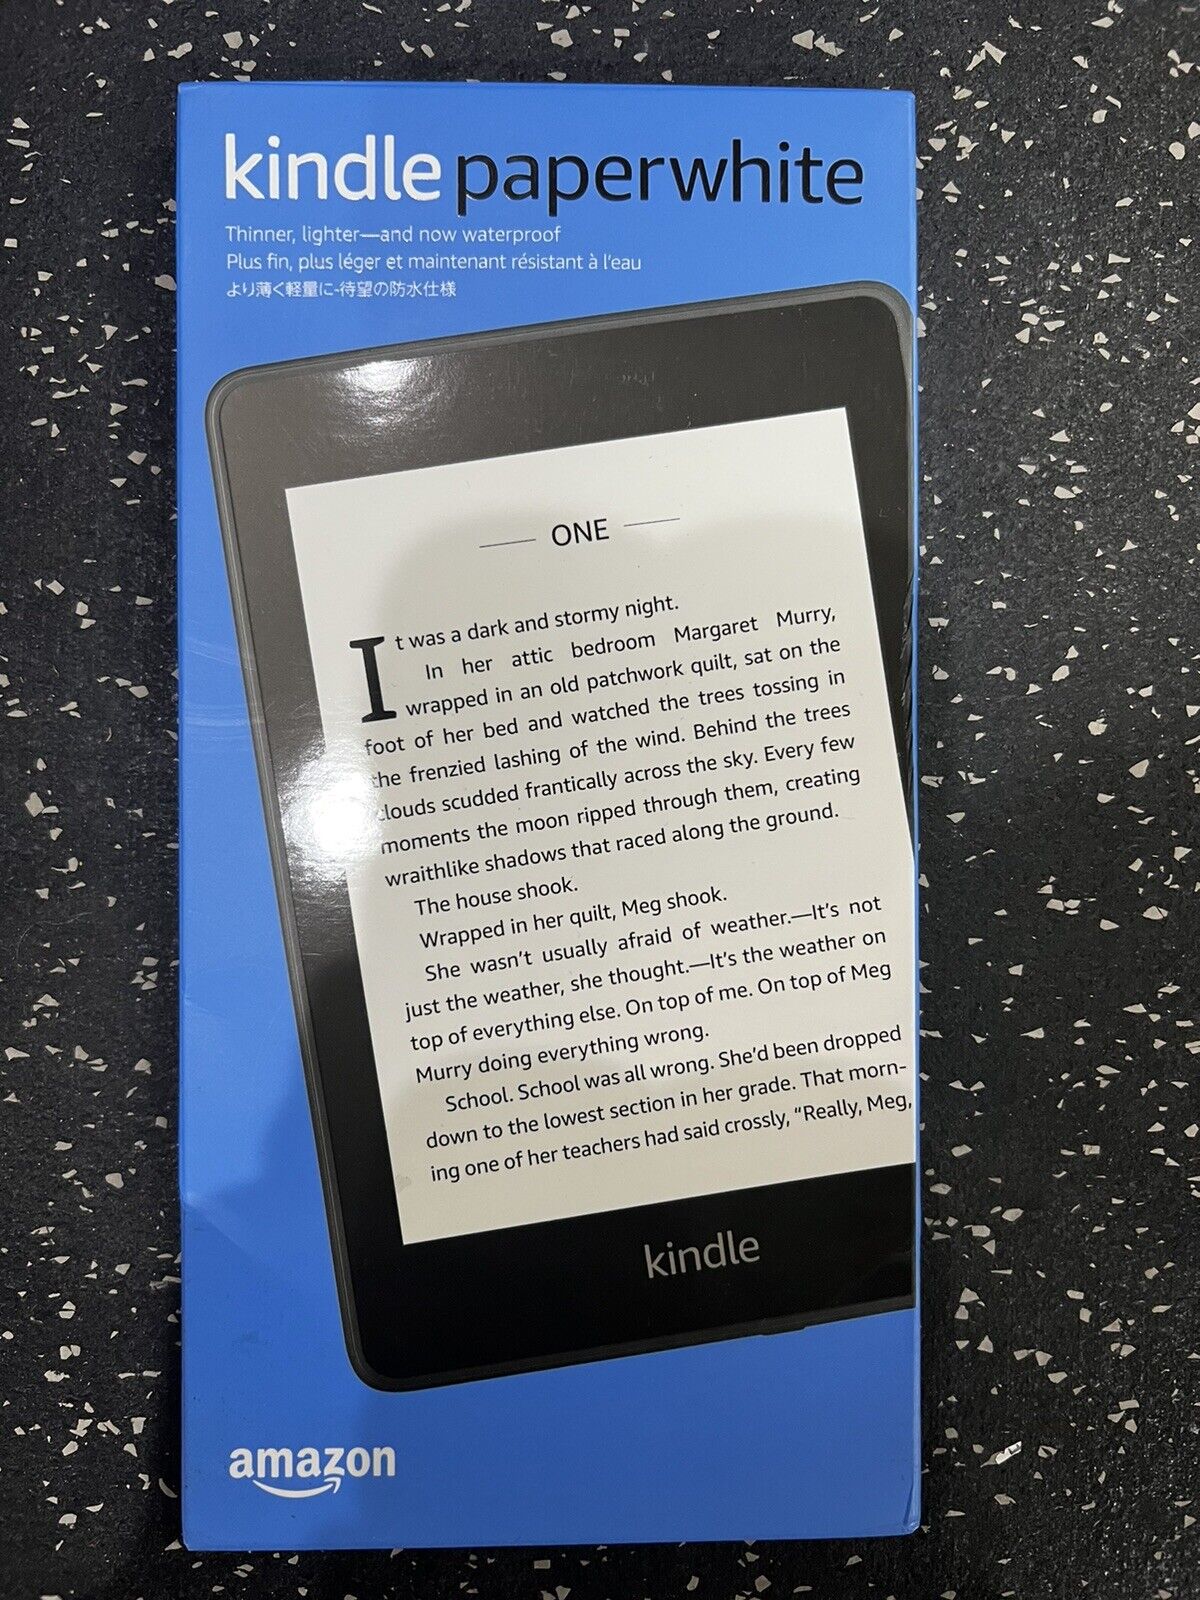 Amazon Kindle Paperwhite 10th Gen 8GB Wi-Fi 6 eBook Reader Black w Offer-New. Available Now for $109.95